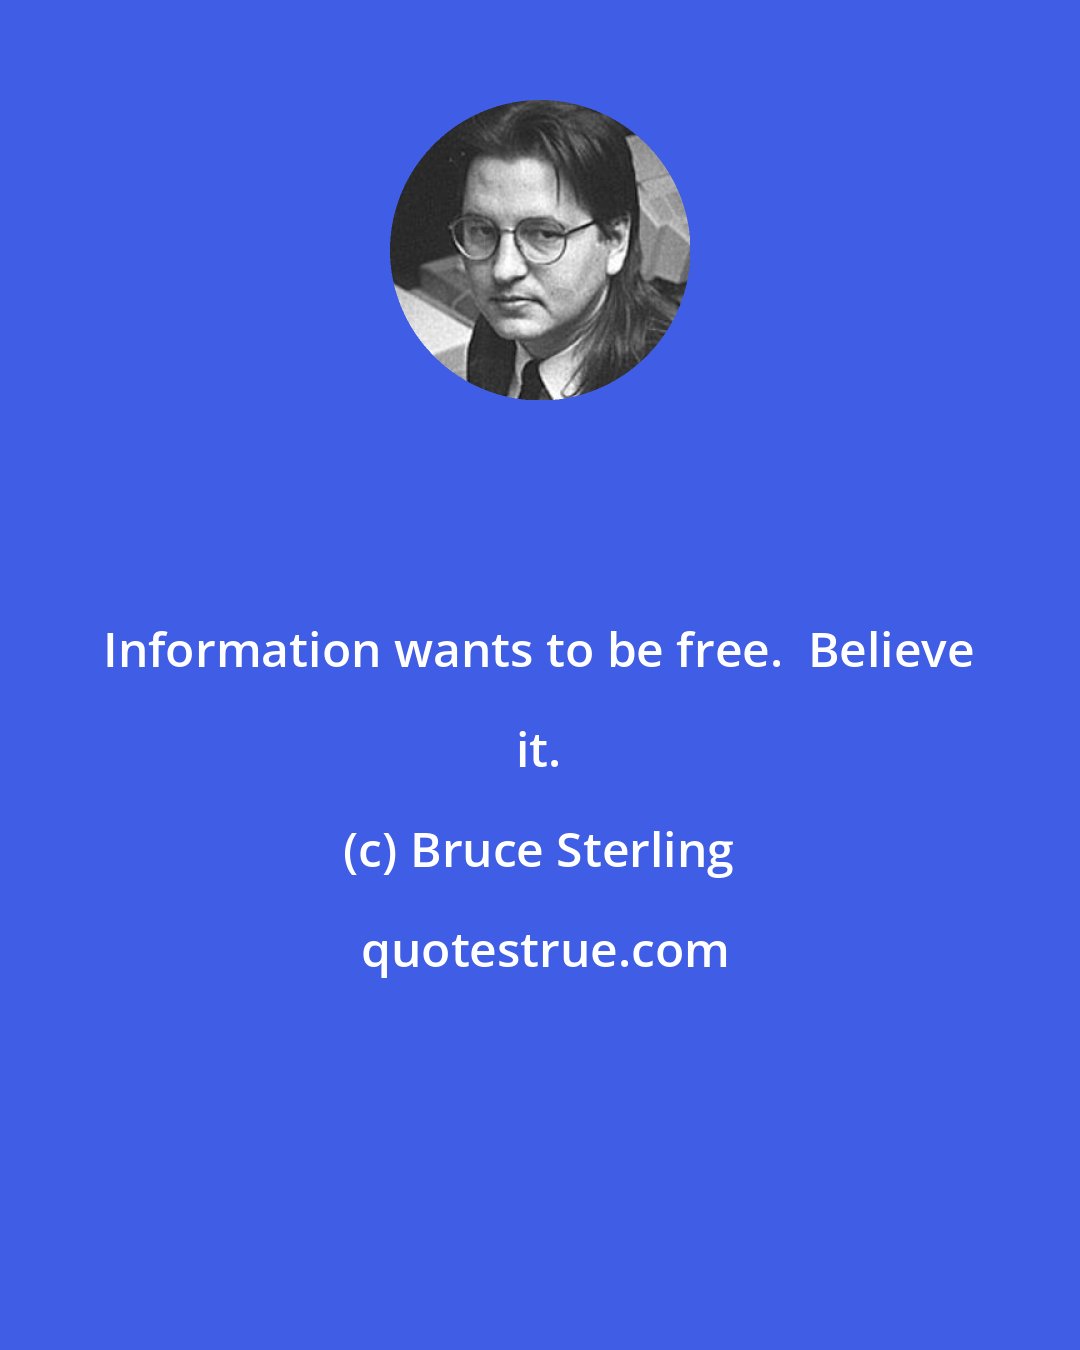 Bruce Sterling: Information wants to be free.  Believe it.